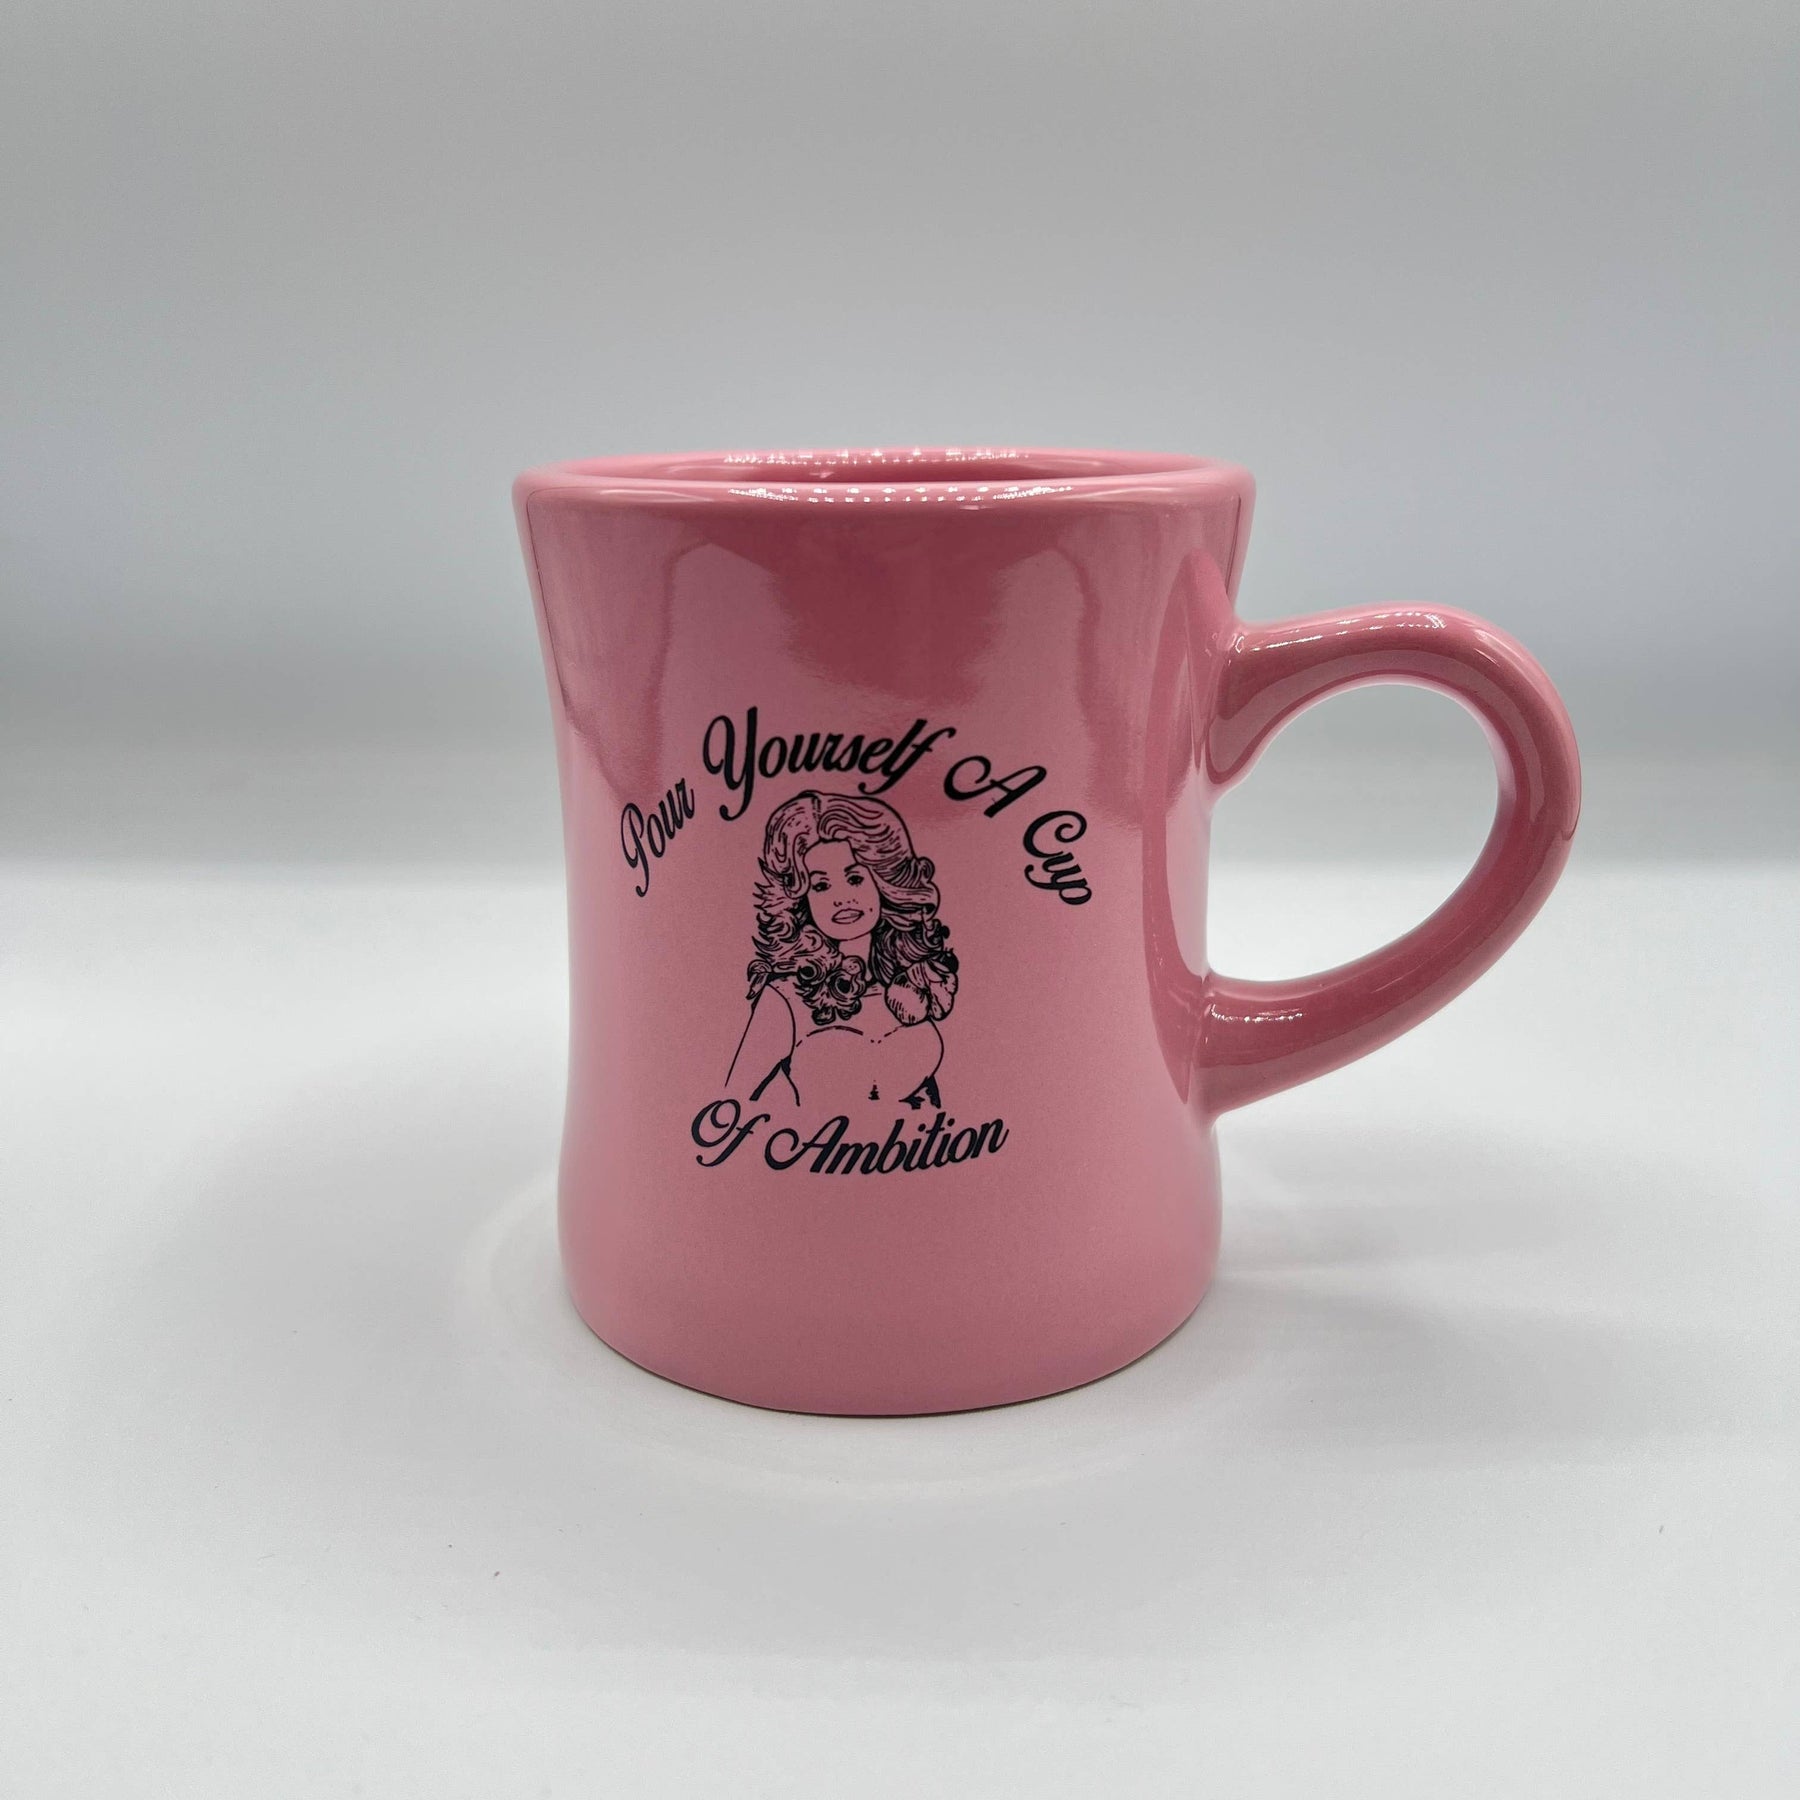 Pour Yourself A Cup Of Ambition - Dolly Parton Diner Mug